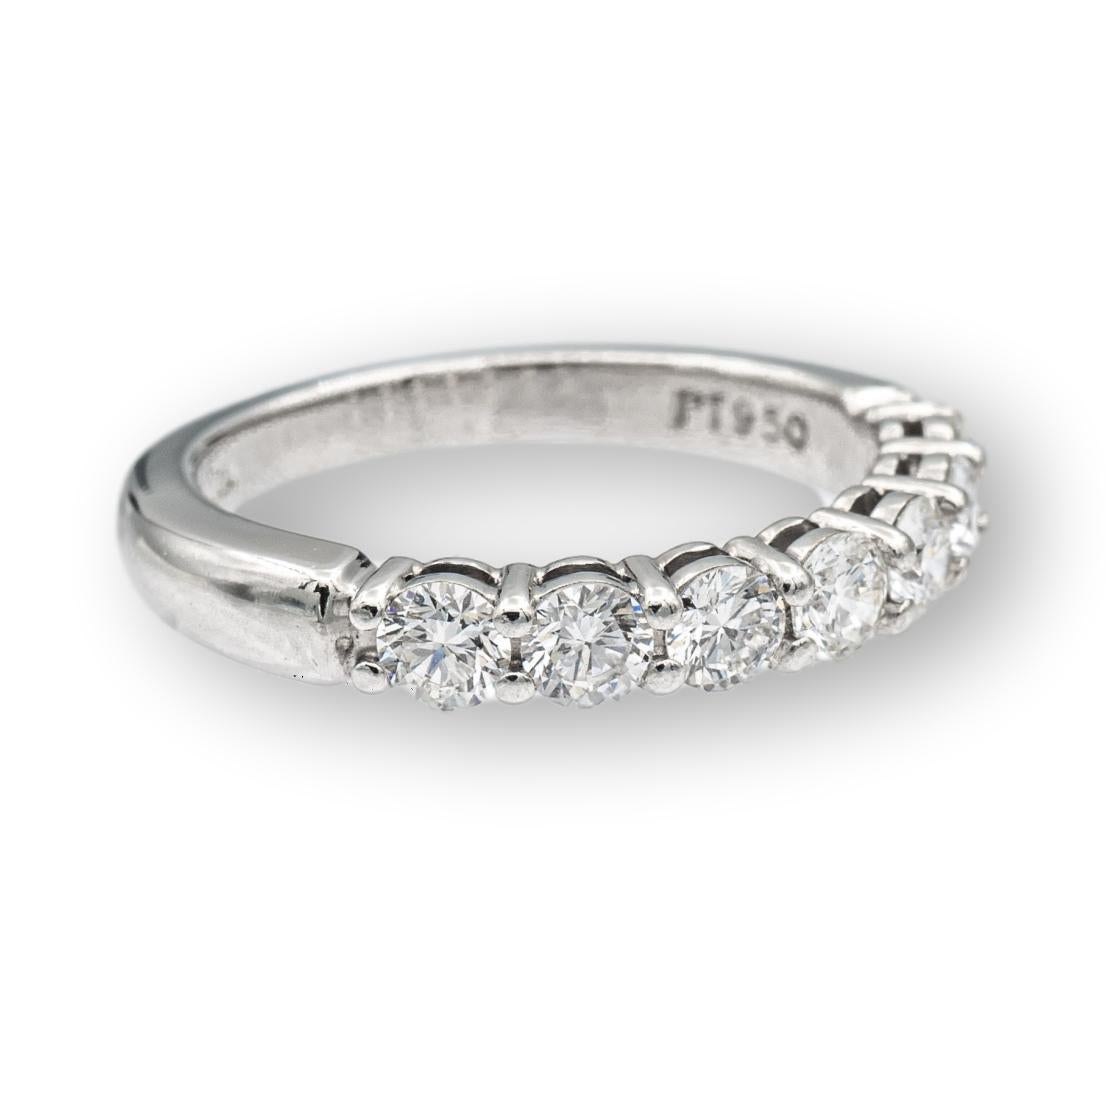 Tiffany & Co. Embrace Half Band ring finely crafted in platinum with 7 Round Brilliant cut diamonds weighing .57 carats total weight. Very bright E-F color , VVS2-VS clarity

RING SPECIFICATIONS
Brand: Tiffany & Co.
Hallmarks: Tiffany & Co. PT950
7